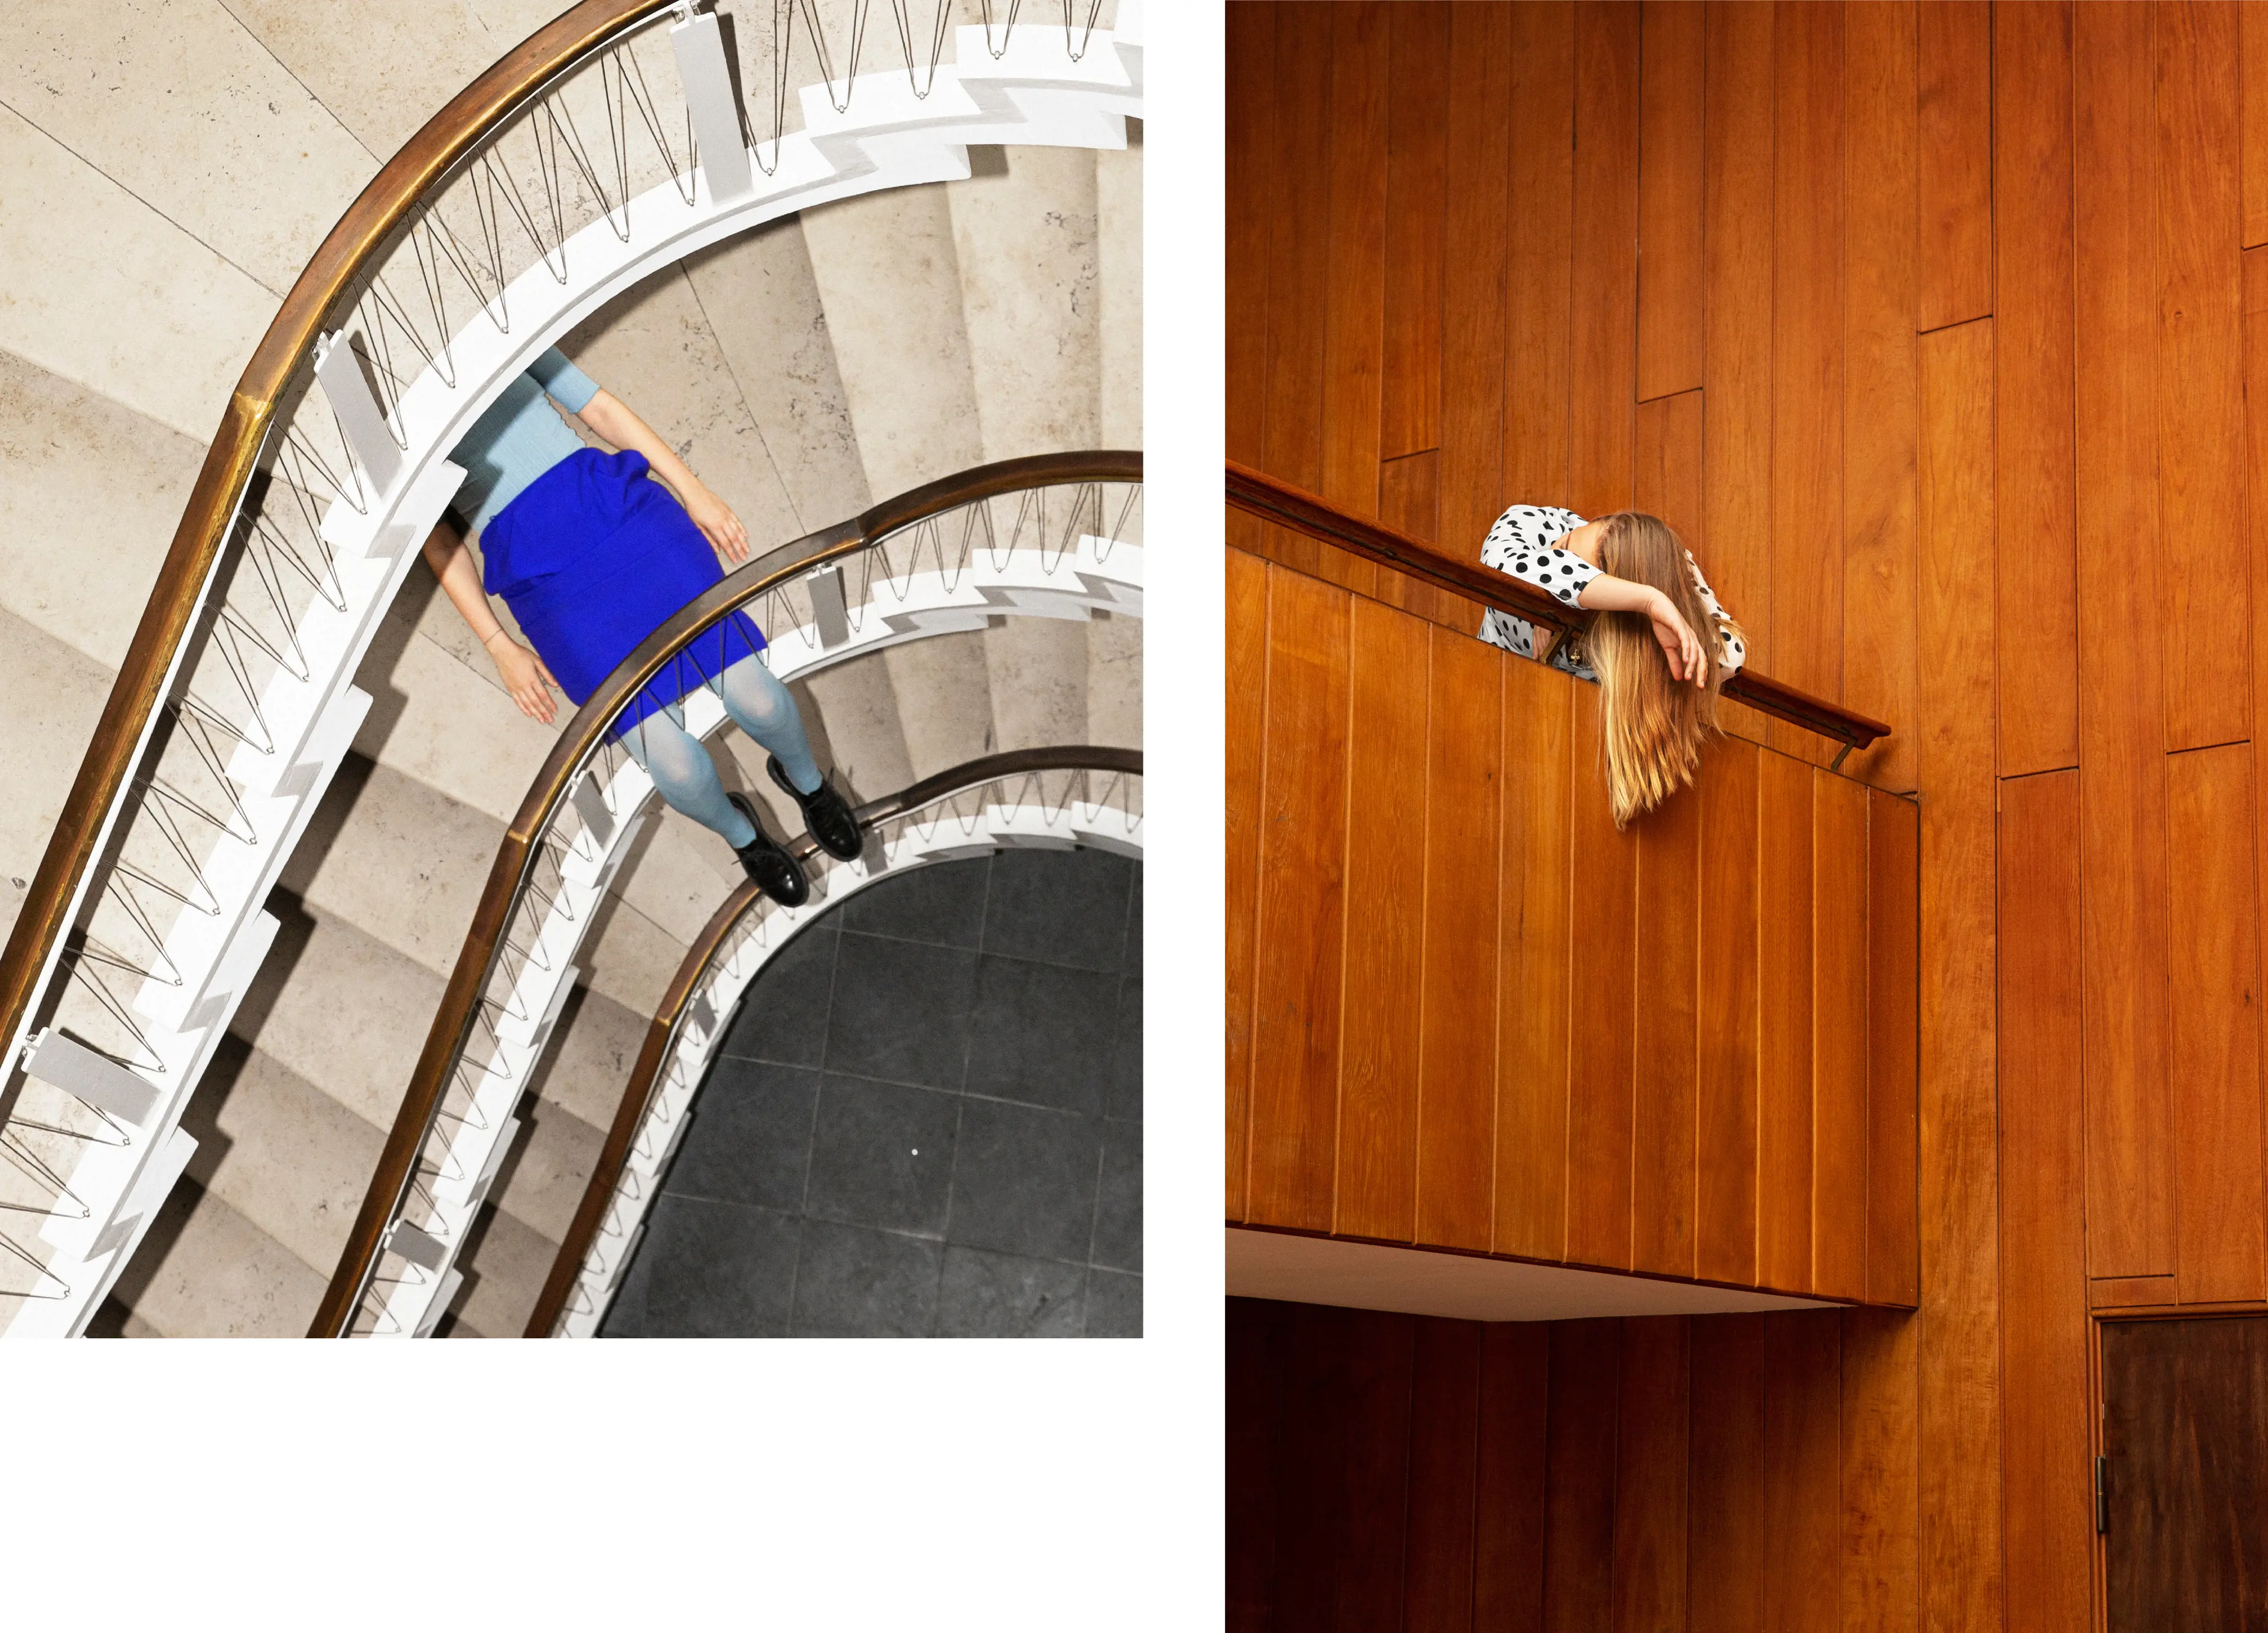 2 pictures of women in staircase: one is resting her head on a bannister while the other, who's upper body part is not visible, is lying on stairs with legs dangling through the bannister.